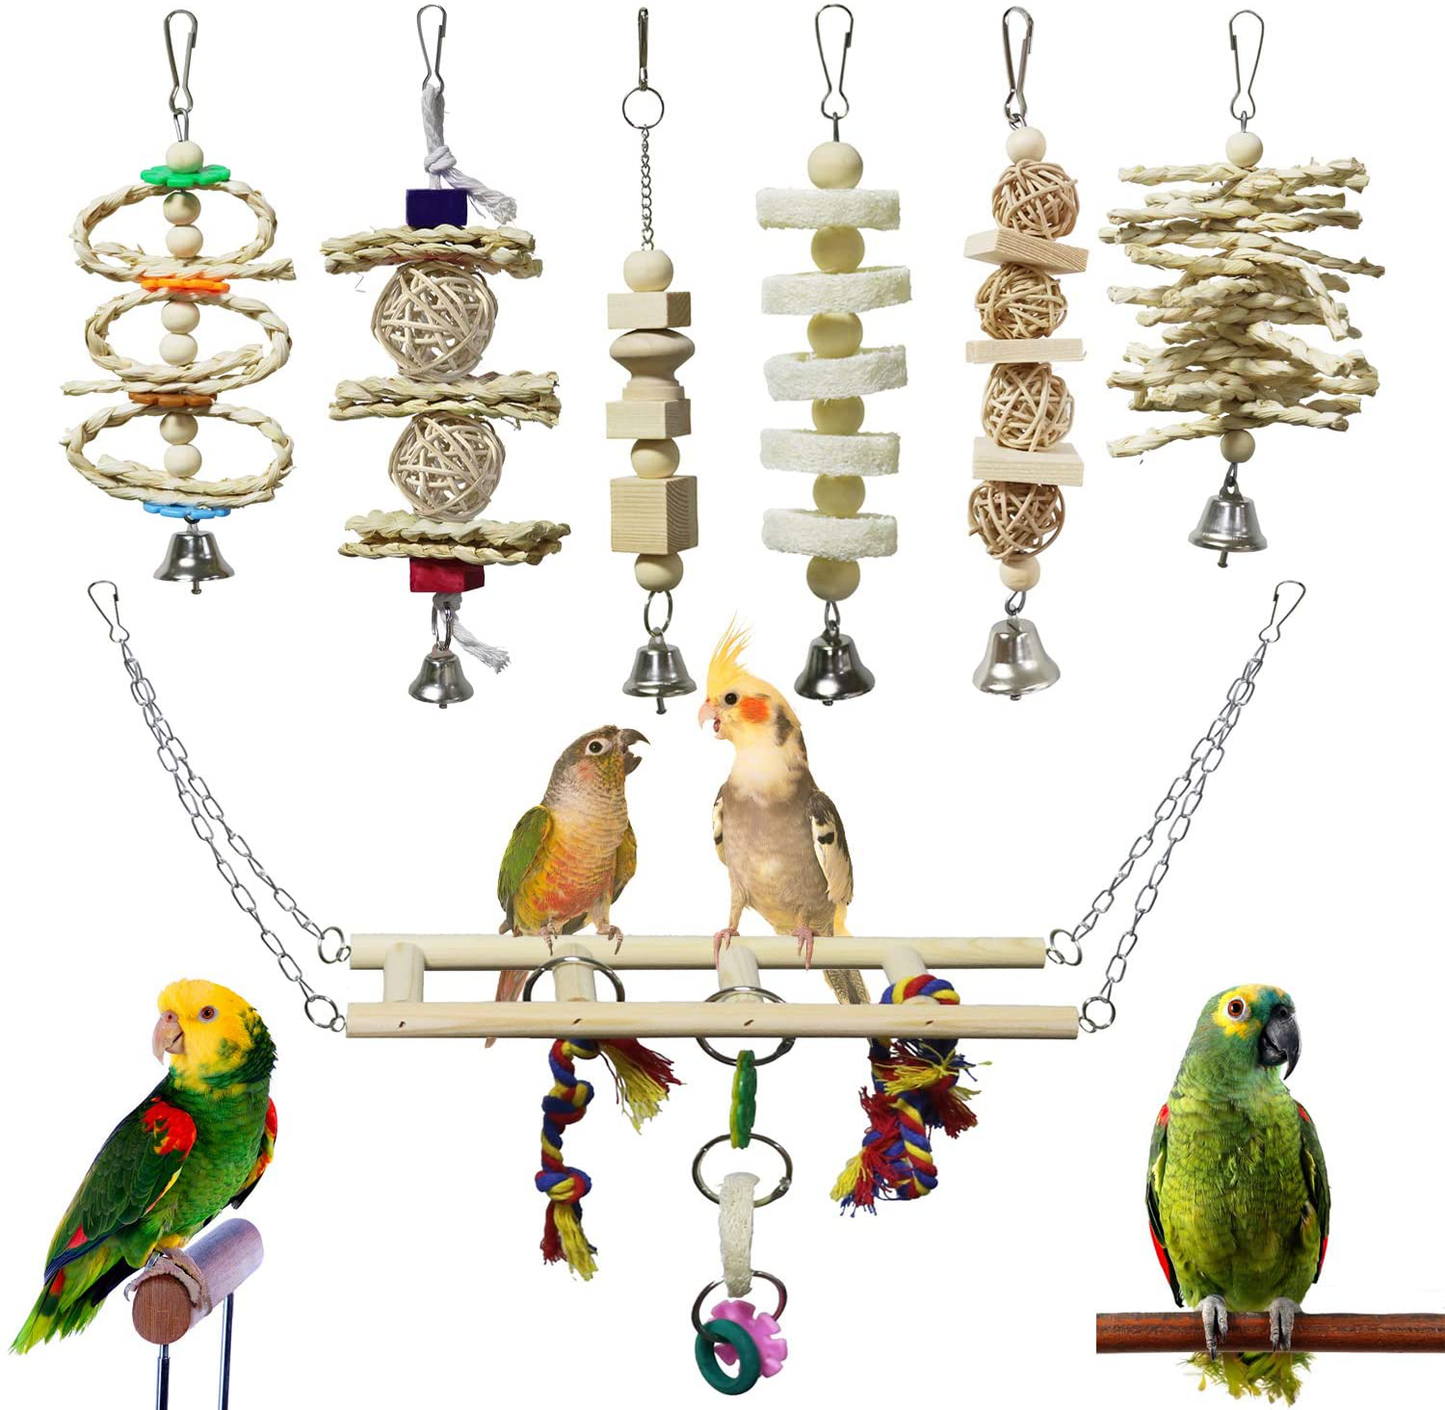 BWOGUE 7 Packs Bird Parrot Toys Natural Wood Chewing Toy Bird Cage Toys Hanging Swing Hammock Climbing Ladders Toys for Small Parakeets, Cockatiels, Conures, Finches,Budgie, Parrots, Love Birds Animals & Pet Supplies > Pet Supplies > Bird Supplies > Bird Toys BWOGUE   